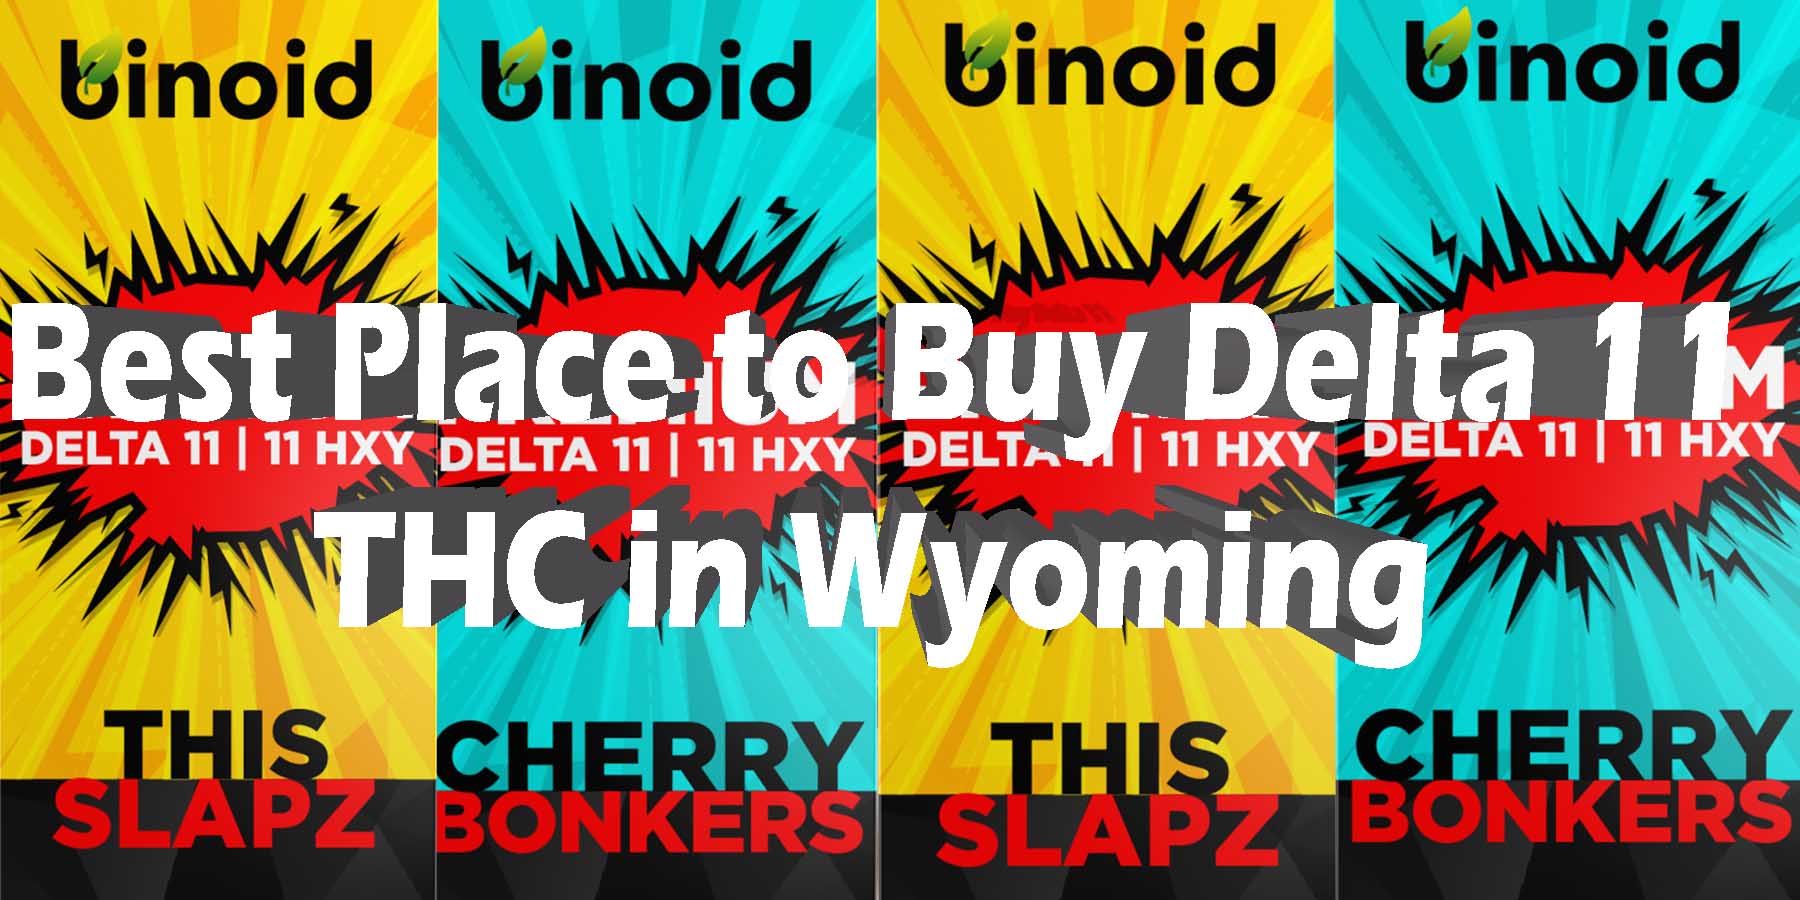 Best Place to Buy Delta 11 THC in Wyoming HowToGetNearMe BestPlace LowestPrice Coupon THC THCA Where To Buy Strongest New D8 D9 OnlineSmokeShop Best In The Market Cheapest Binoid.